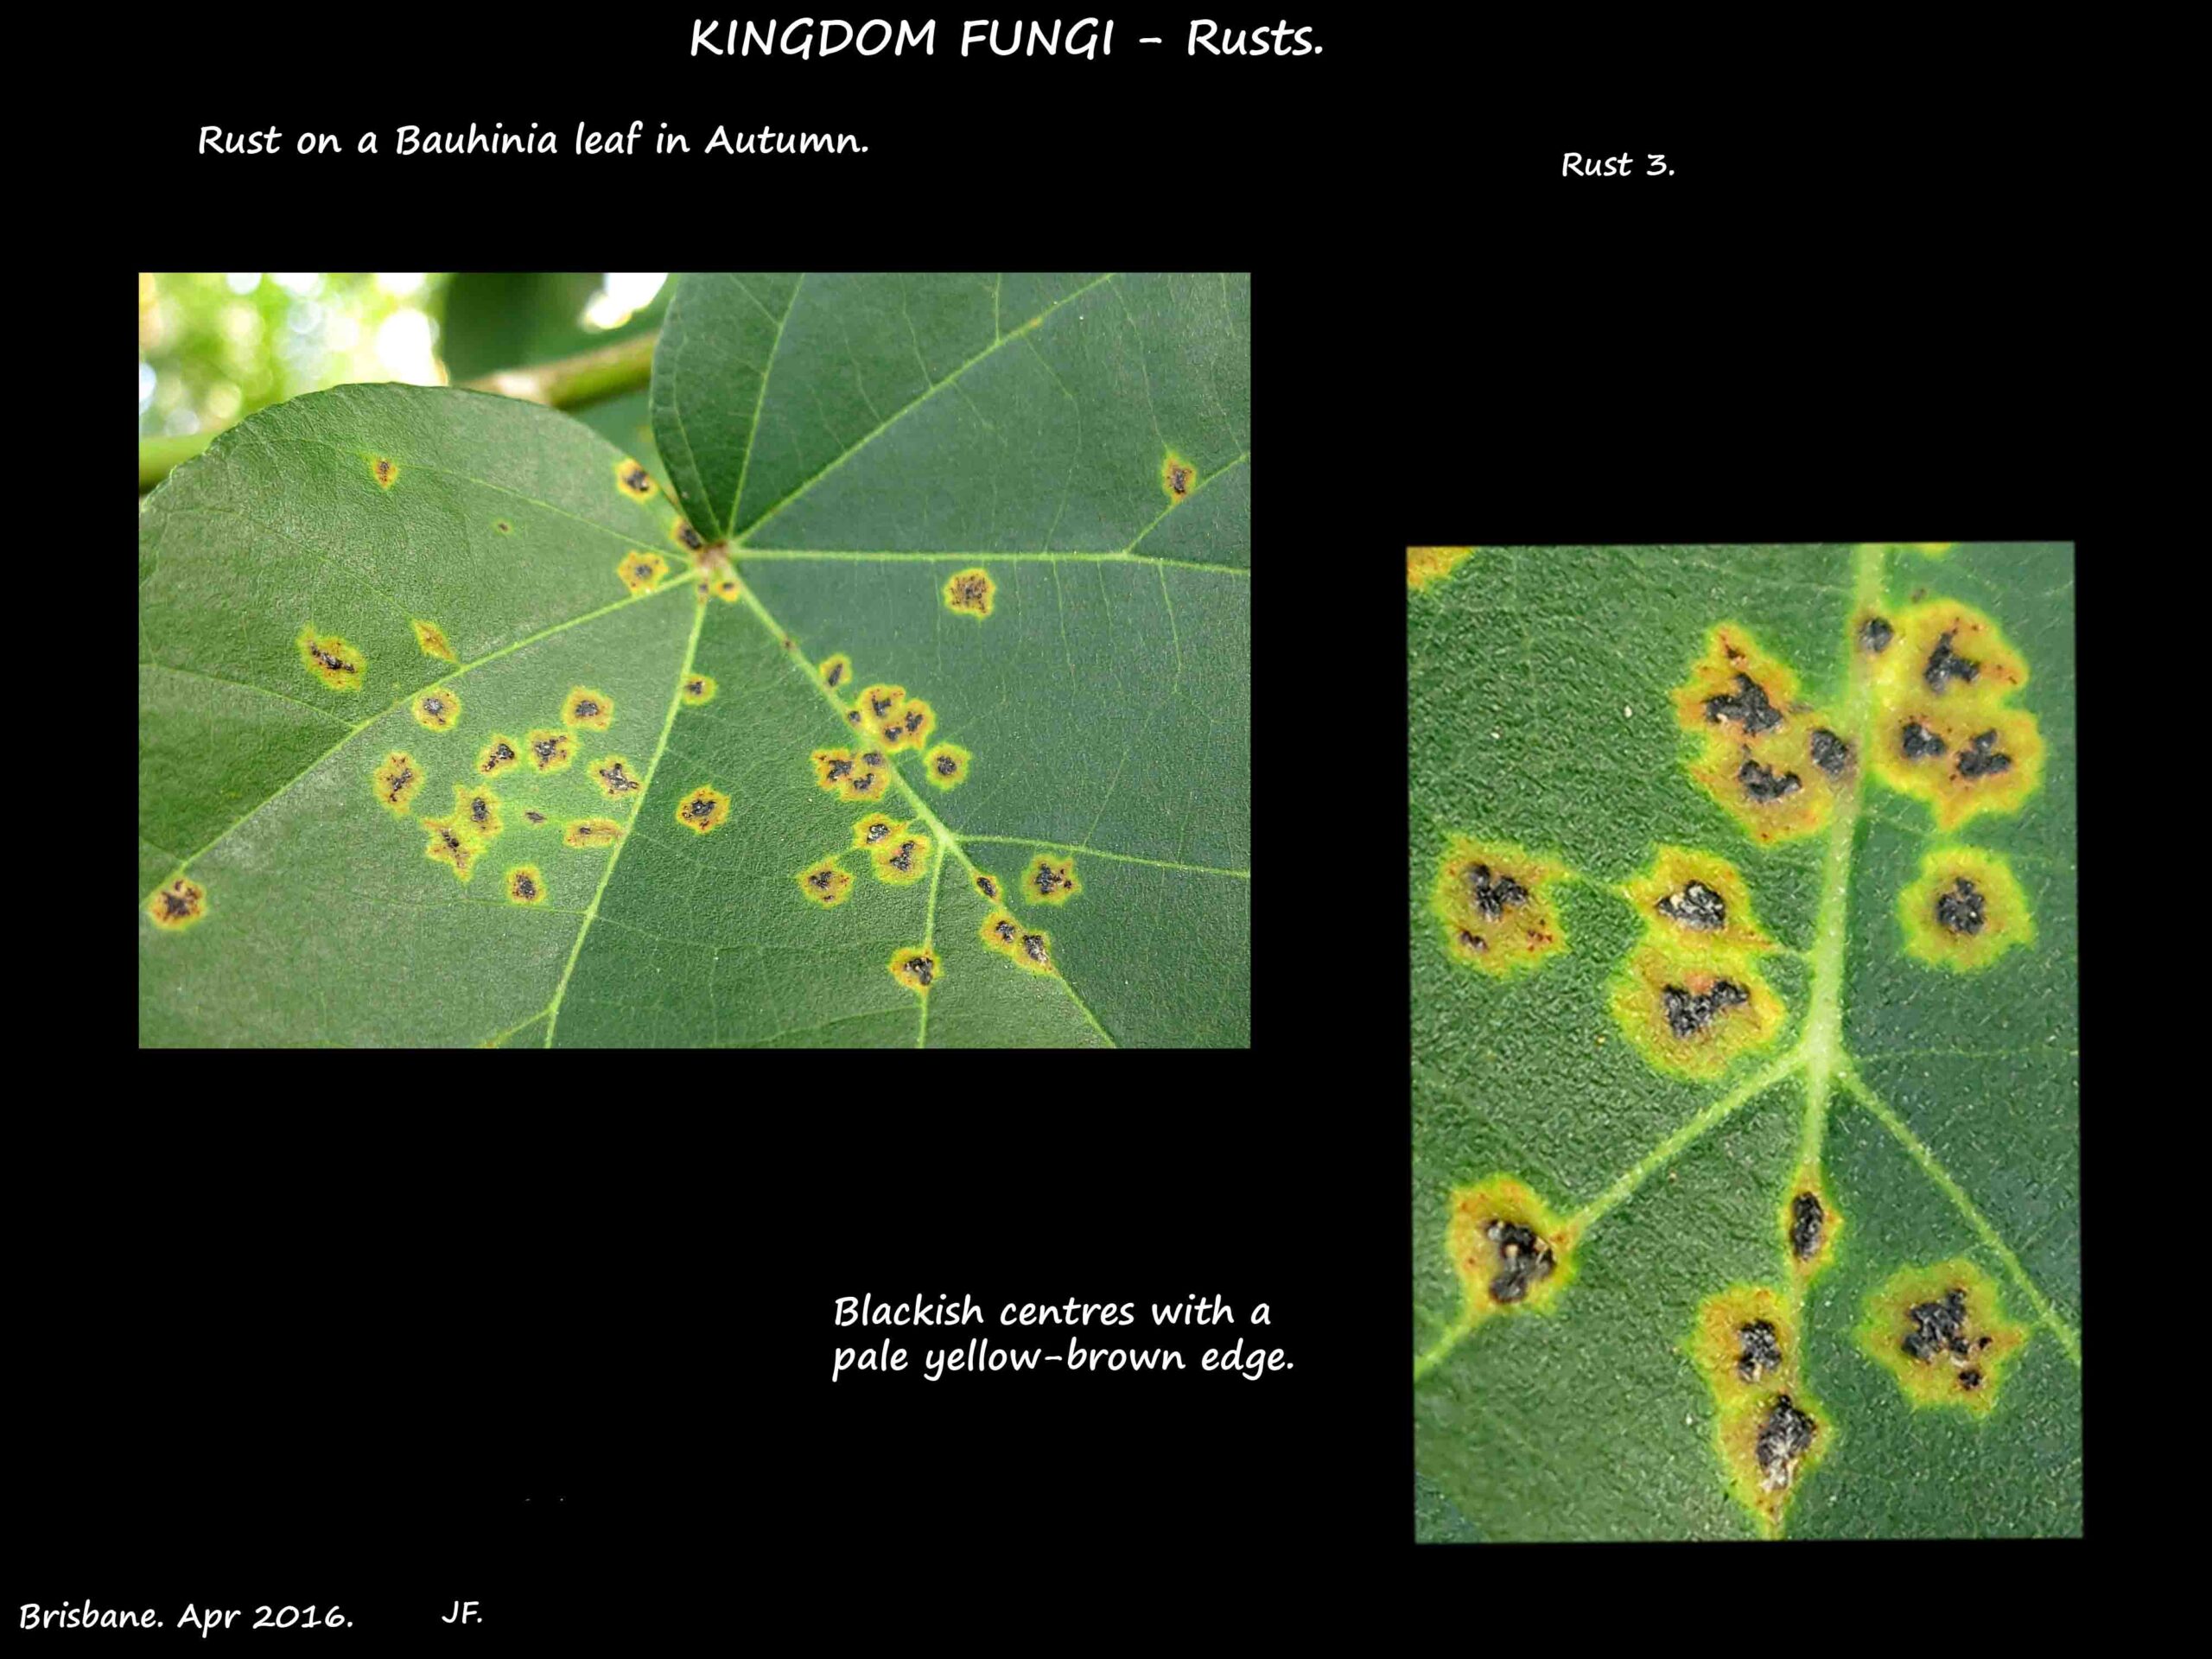 4 Yellow areas of rust with black centres on a leaf